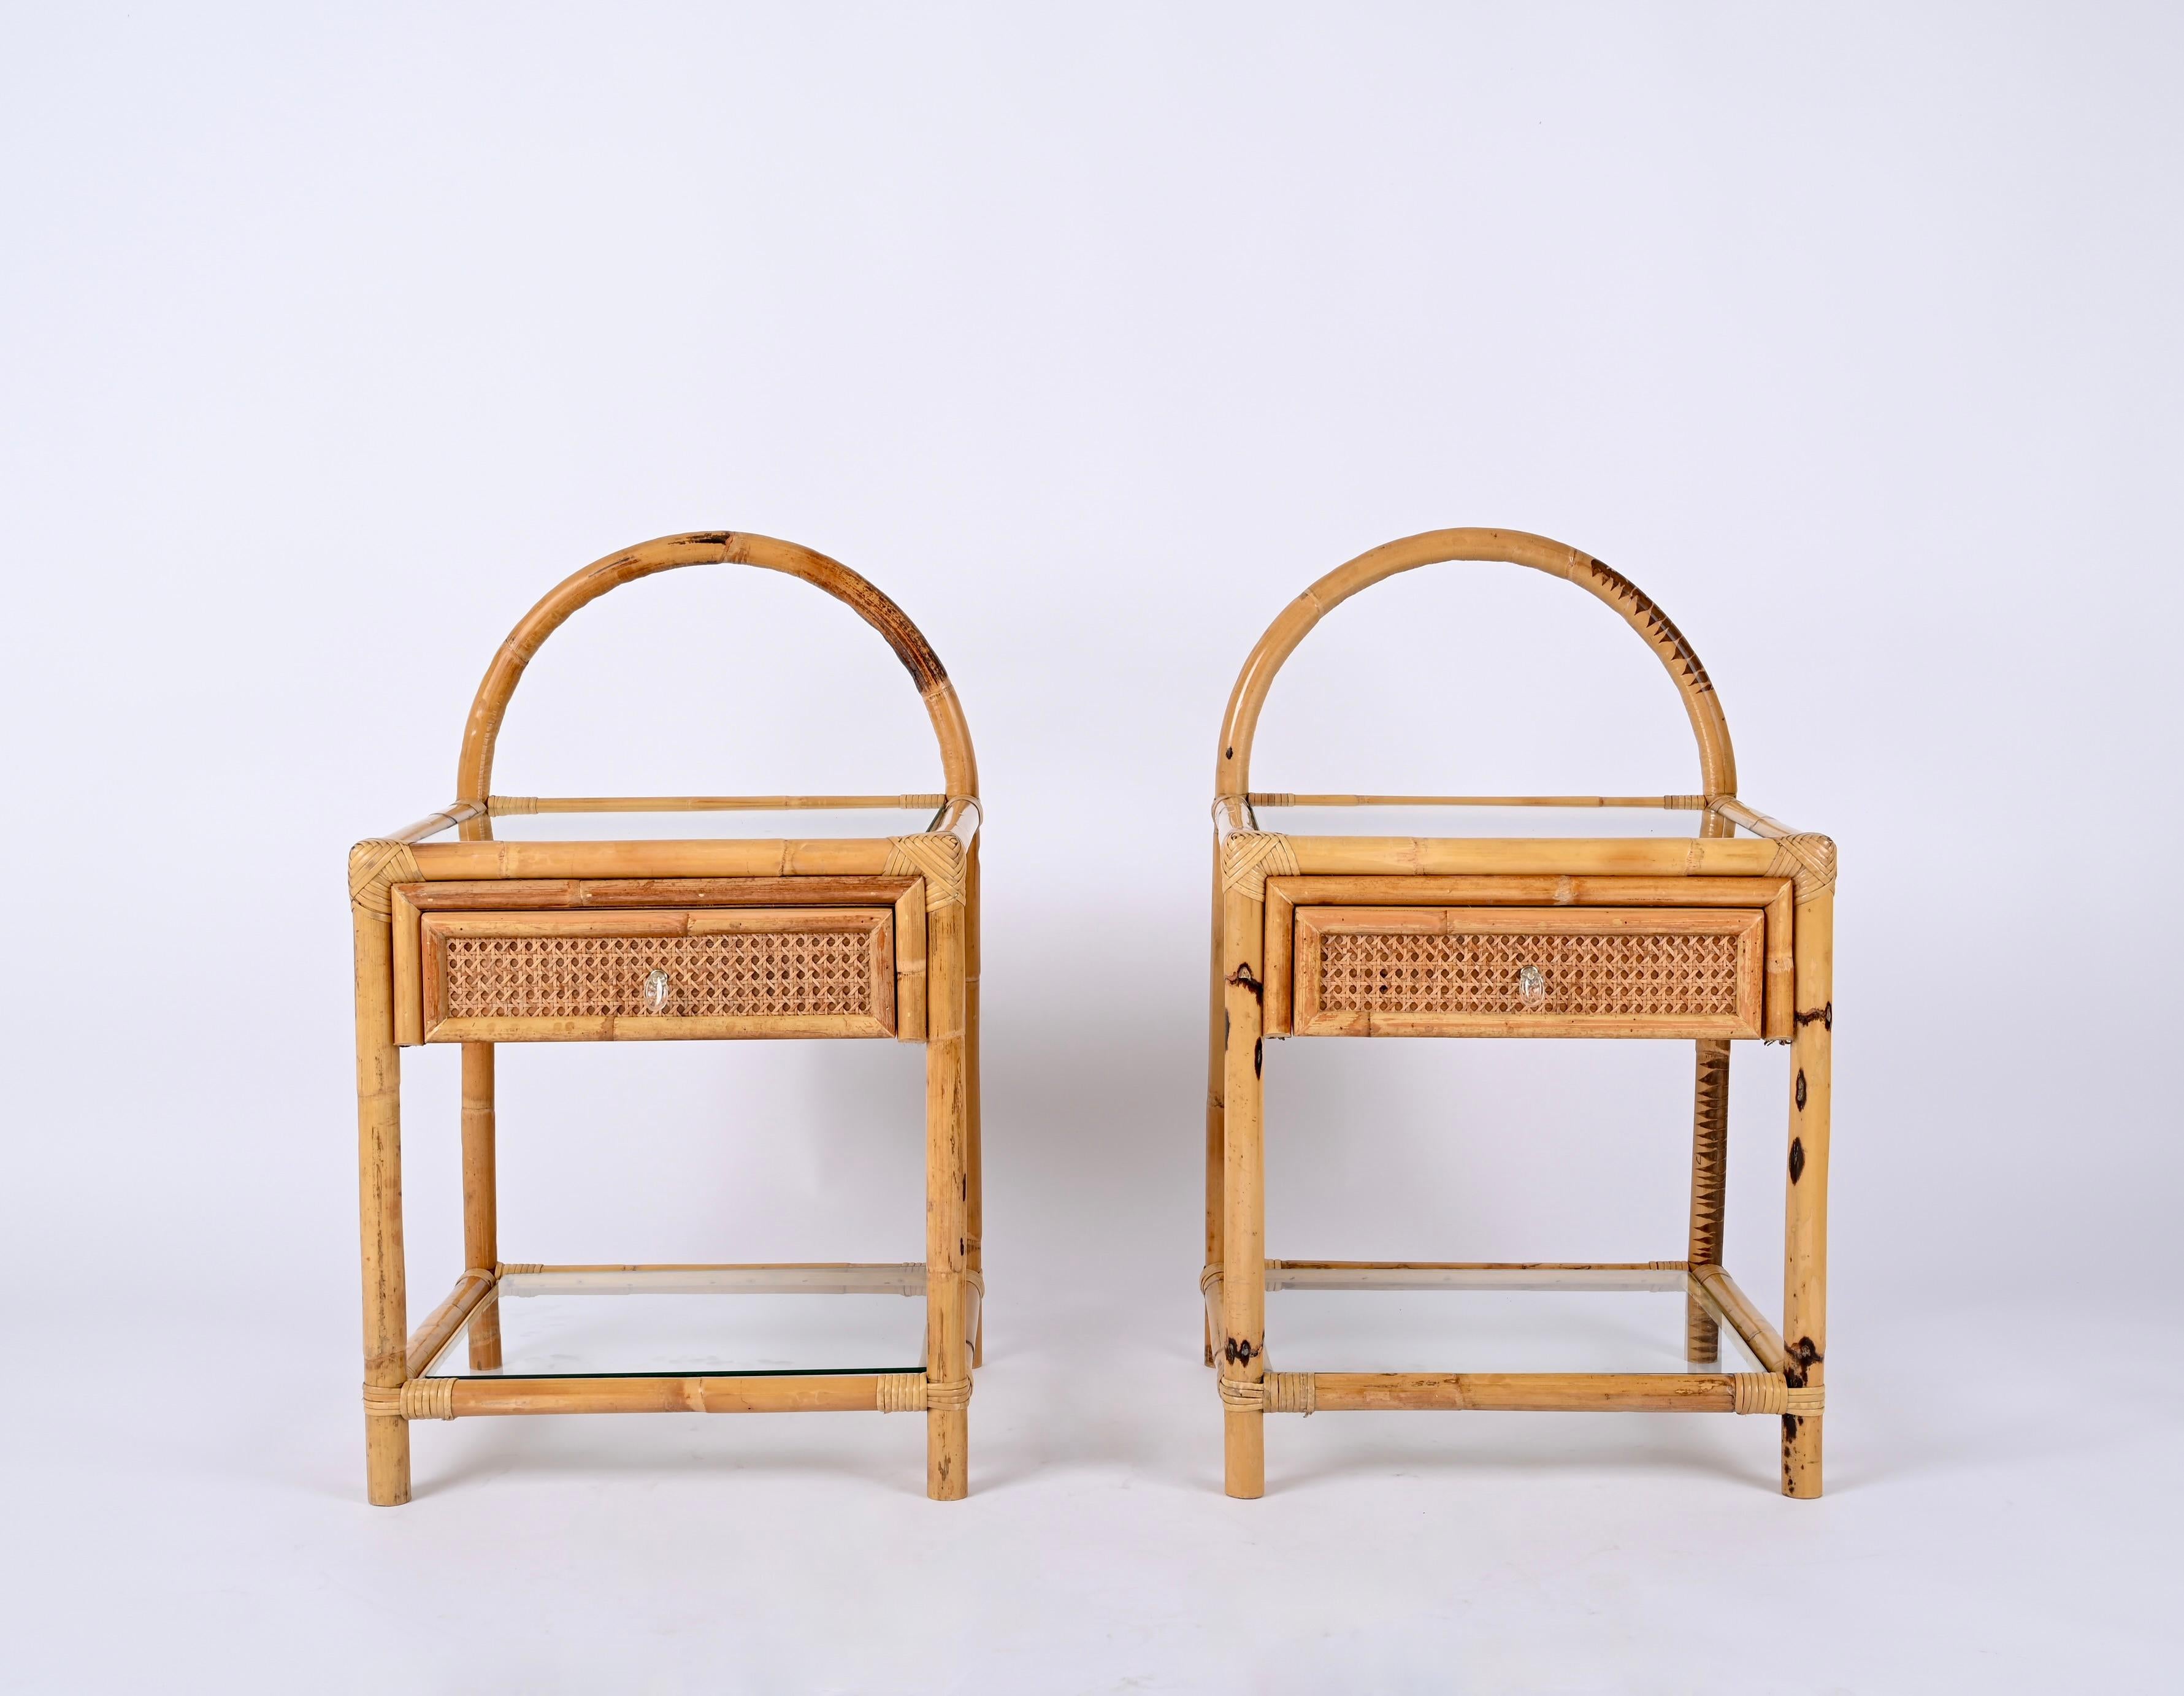 Astonishing pair of Mid-Century Bamboo and Rattan Nightstands, designed in Italy in the 70's.

These unique bedside tables feature a structure made in curved bamboo decorated all around by a lovely hand-woven Vienna straw wicker, the whole is